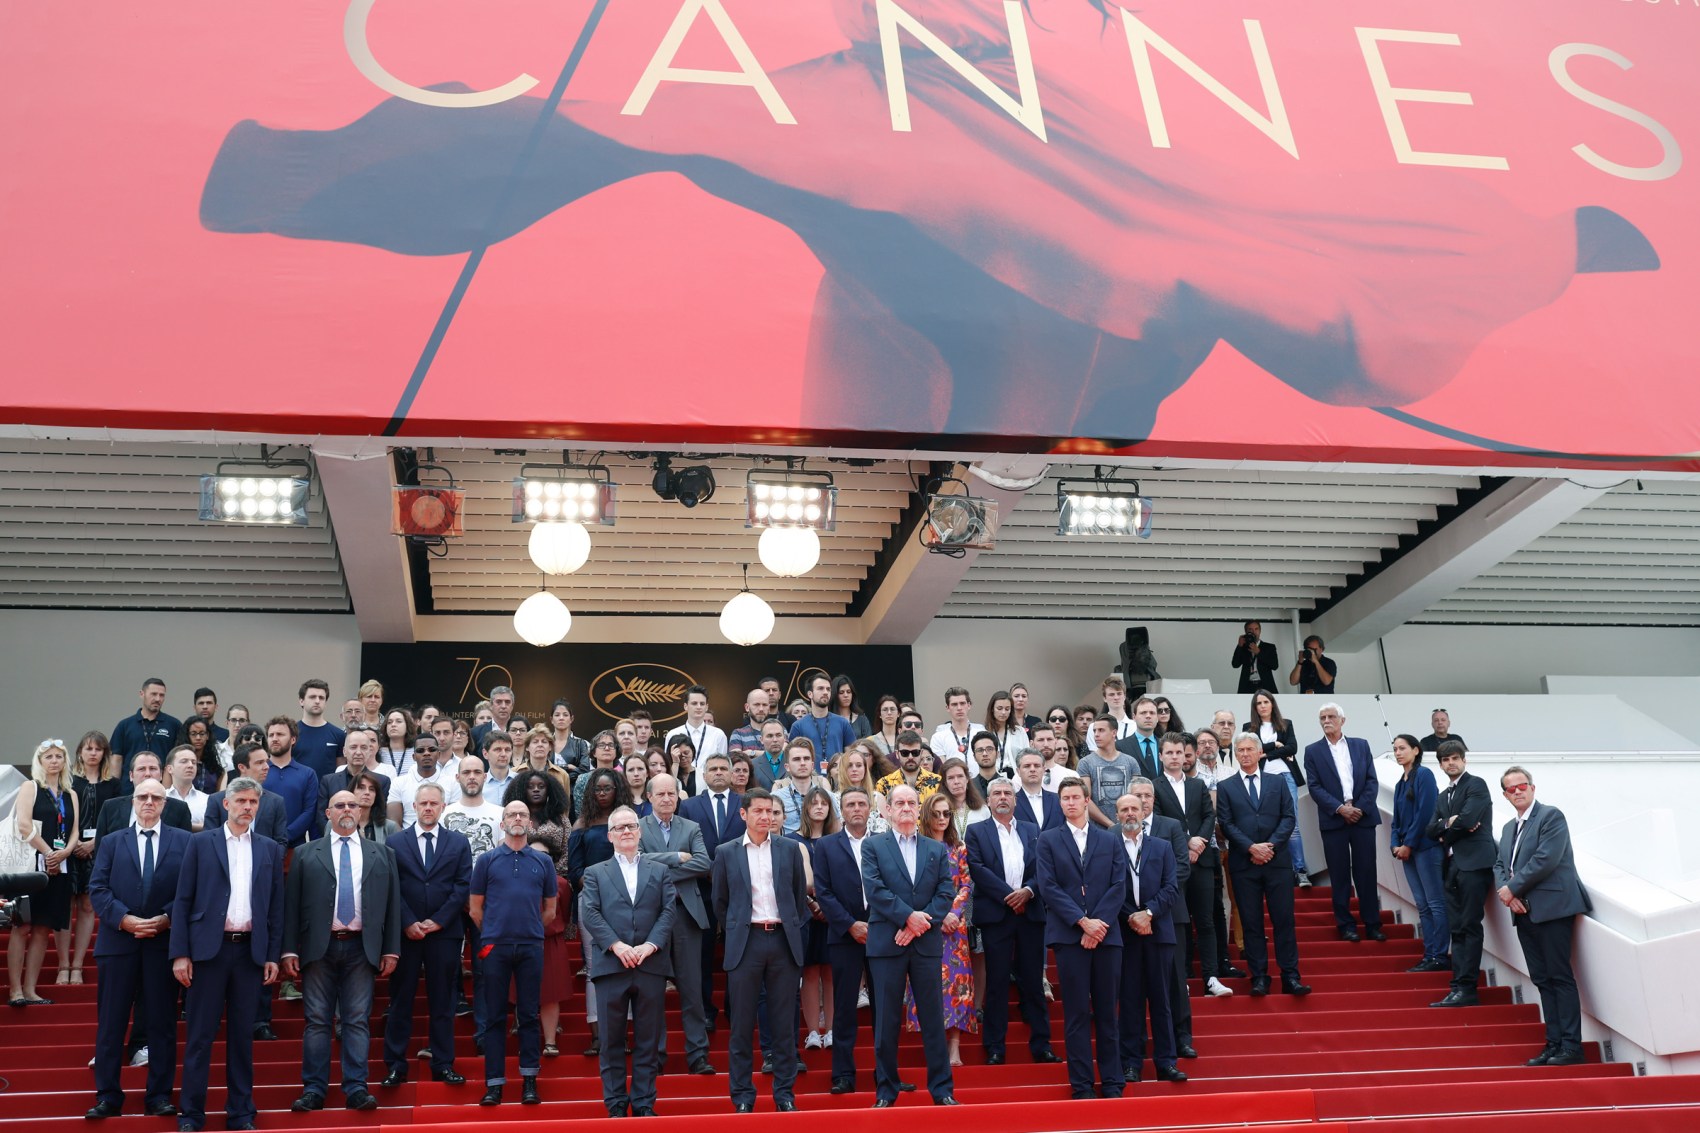 Cannes Film Festival Hold Minutes Silence For The Victims Of The Manchester Terror Attack - The 70th Annual Cannes Film Festival